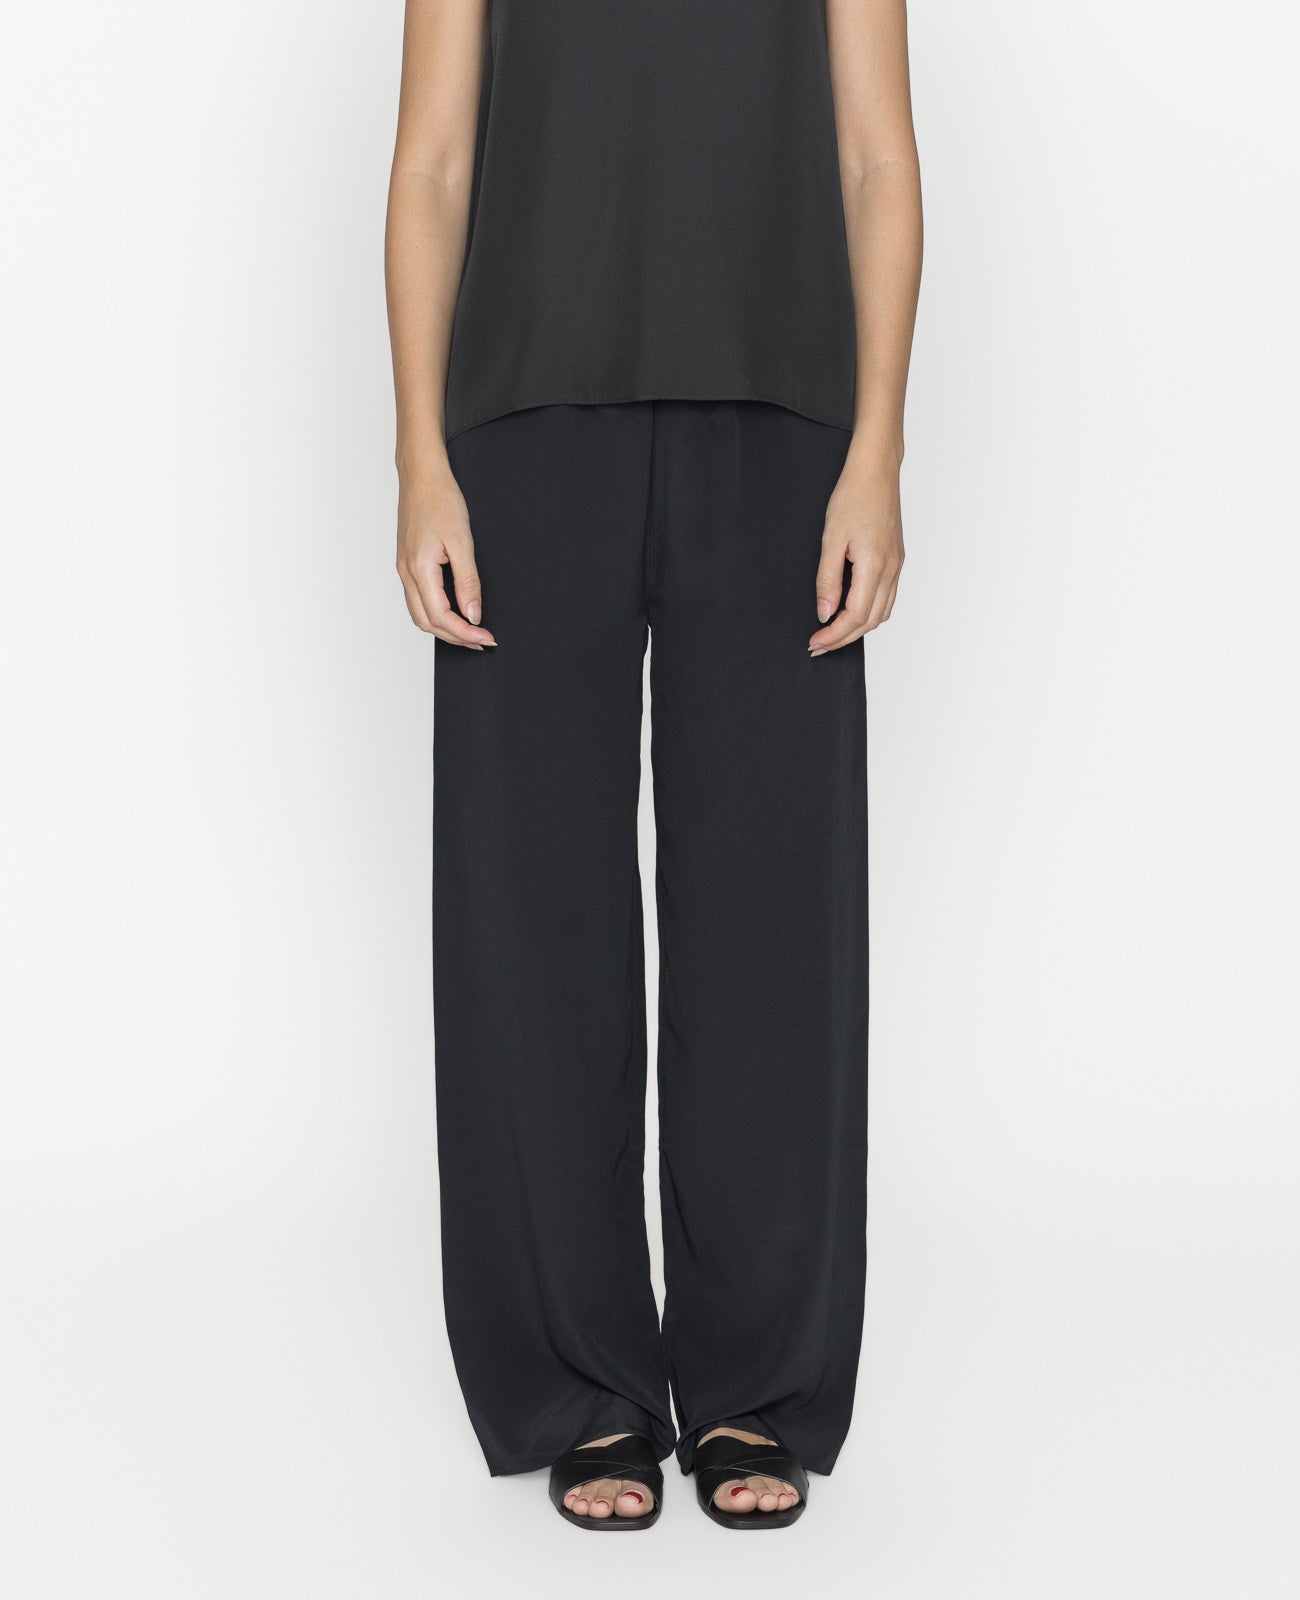 Grana Review Silk Ankle Pants Review — Fairly Curated